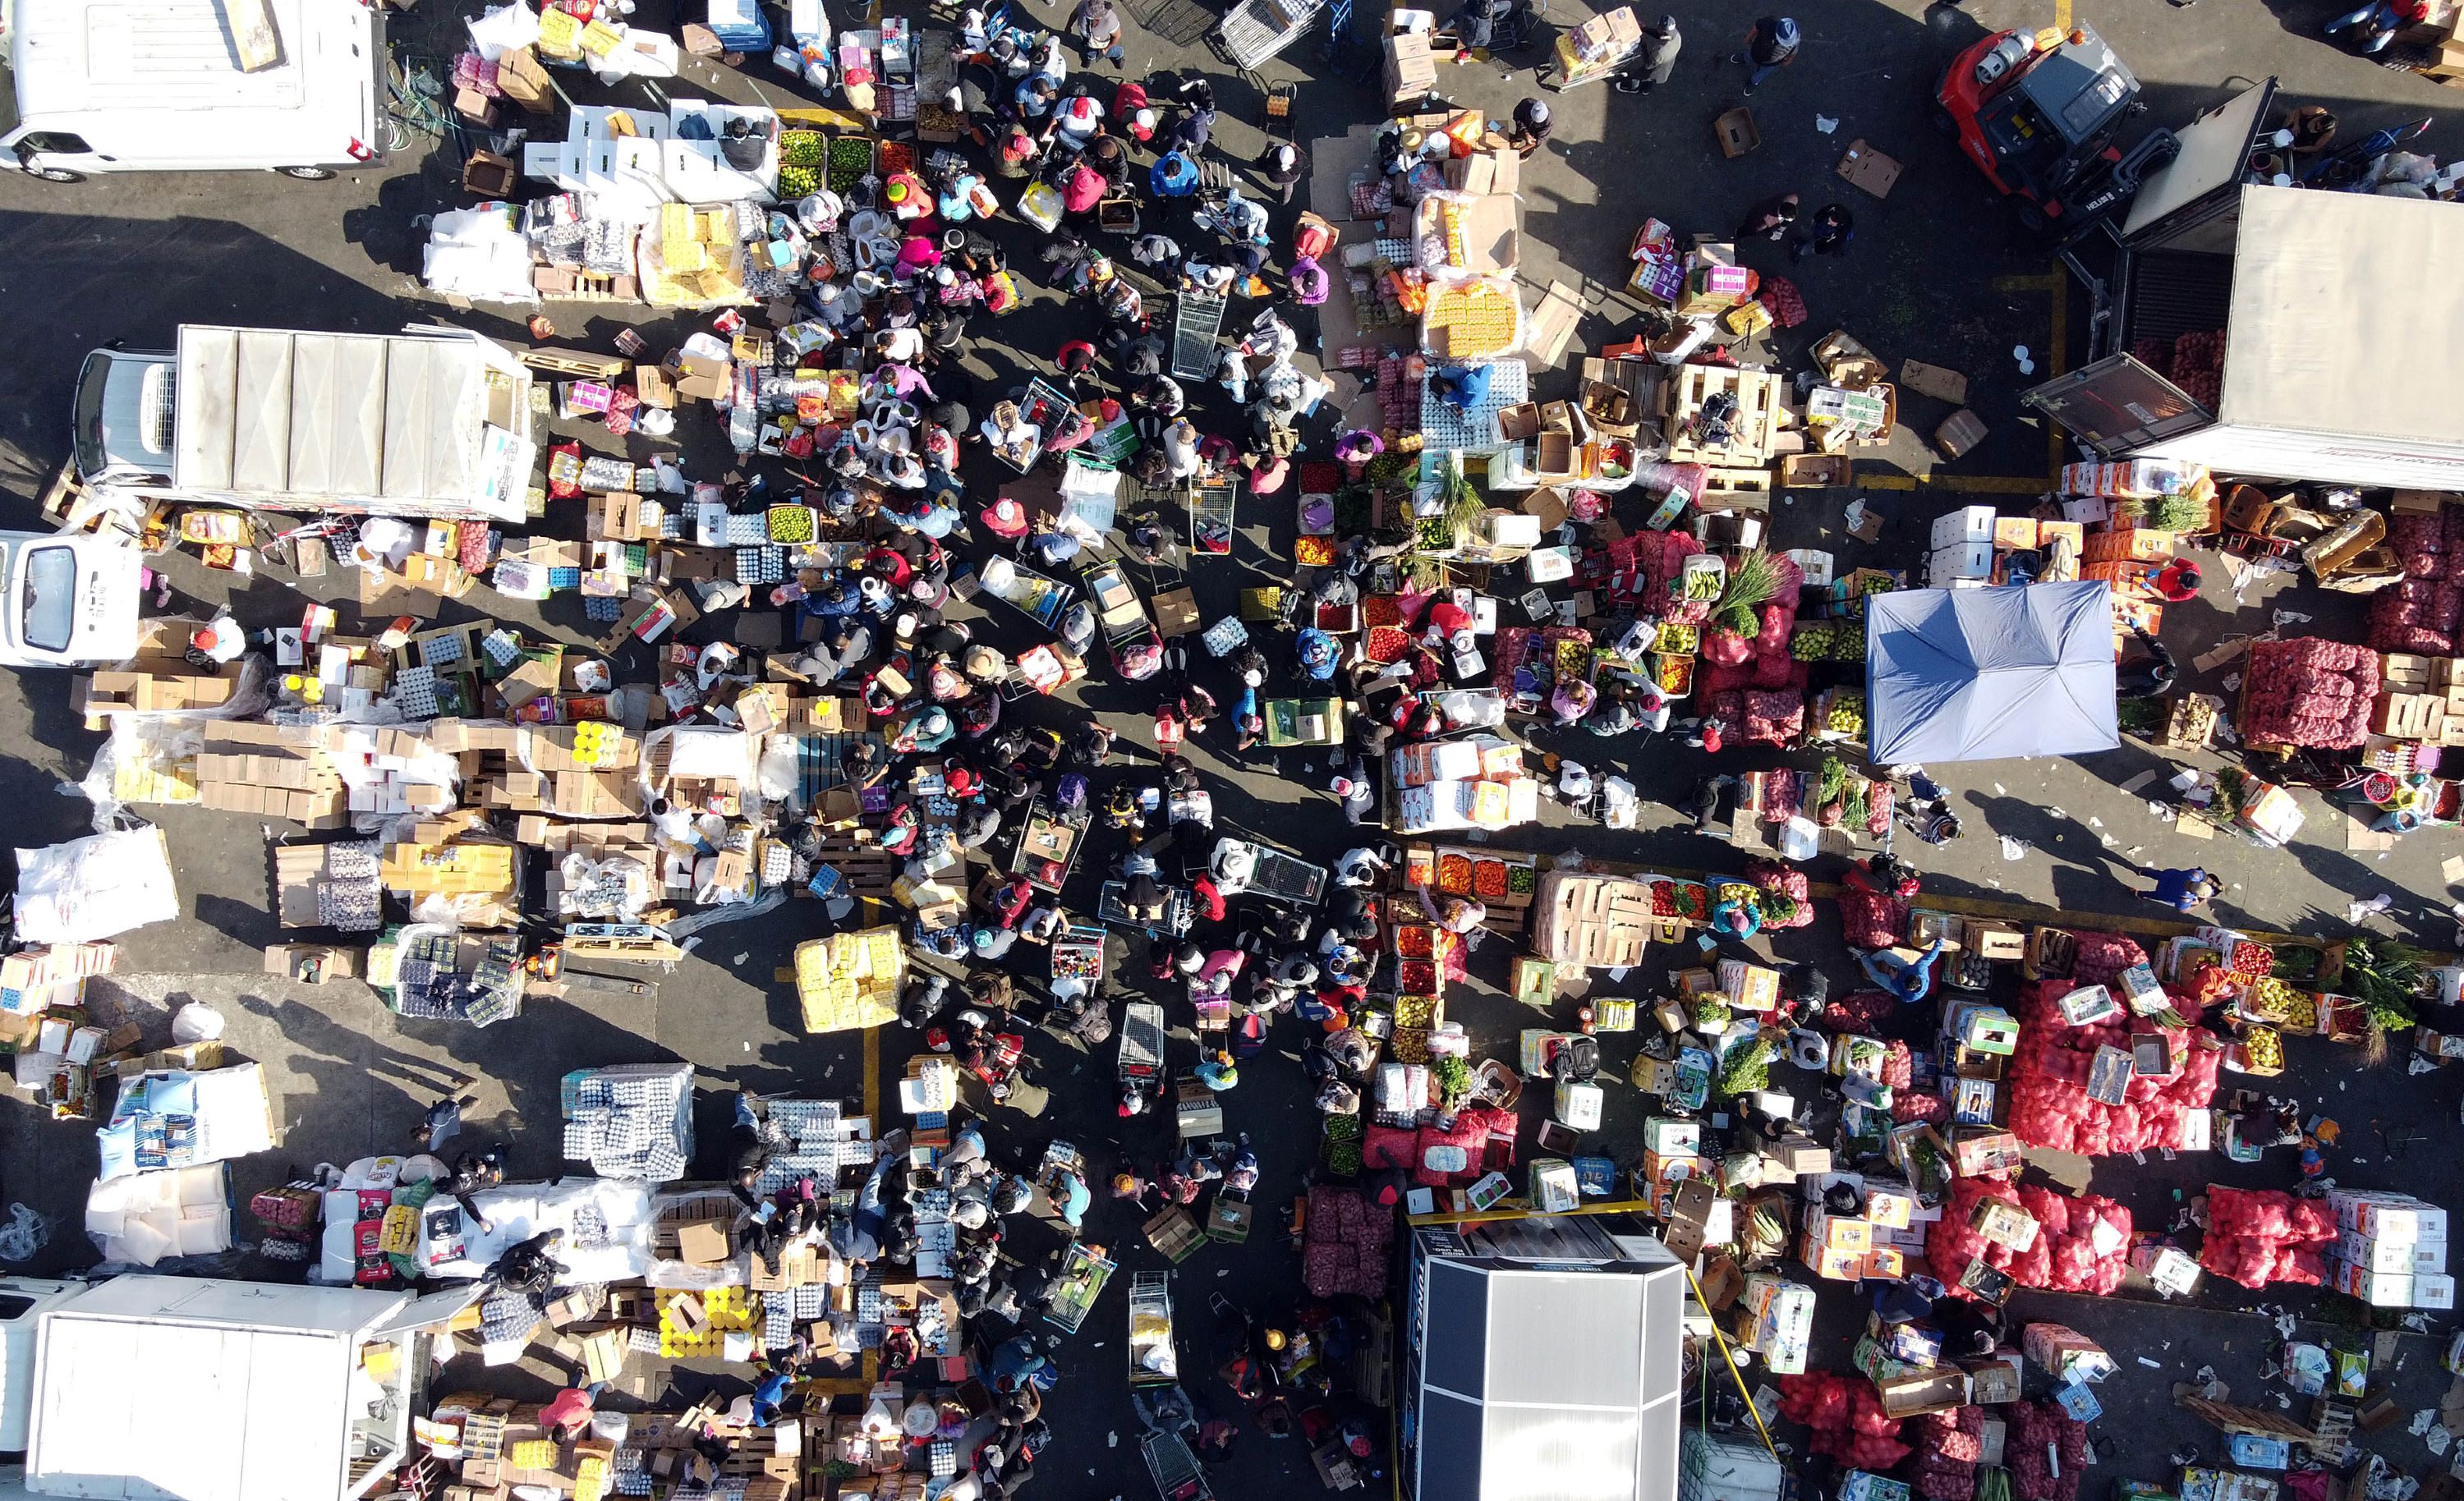 Arial image with shopping trolley in market during the COVID pandemic in Chile